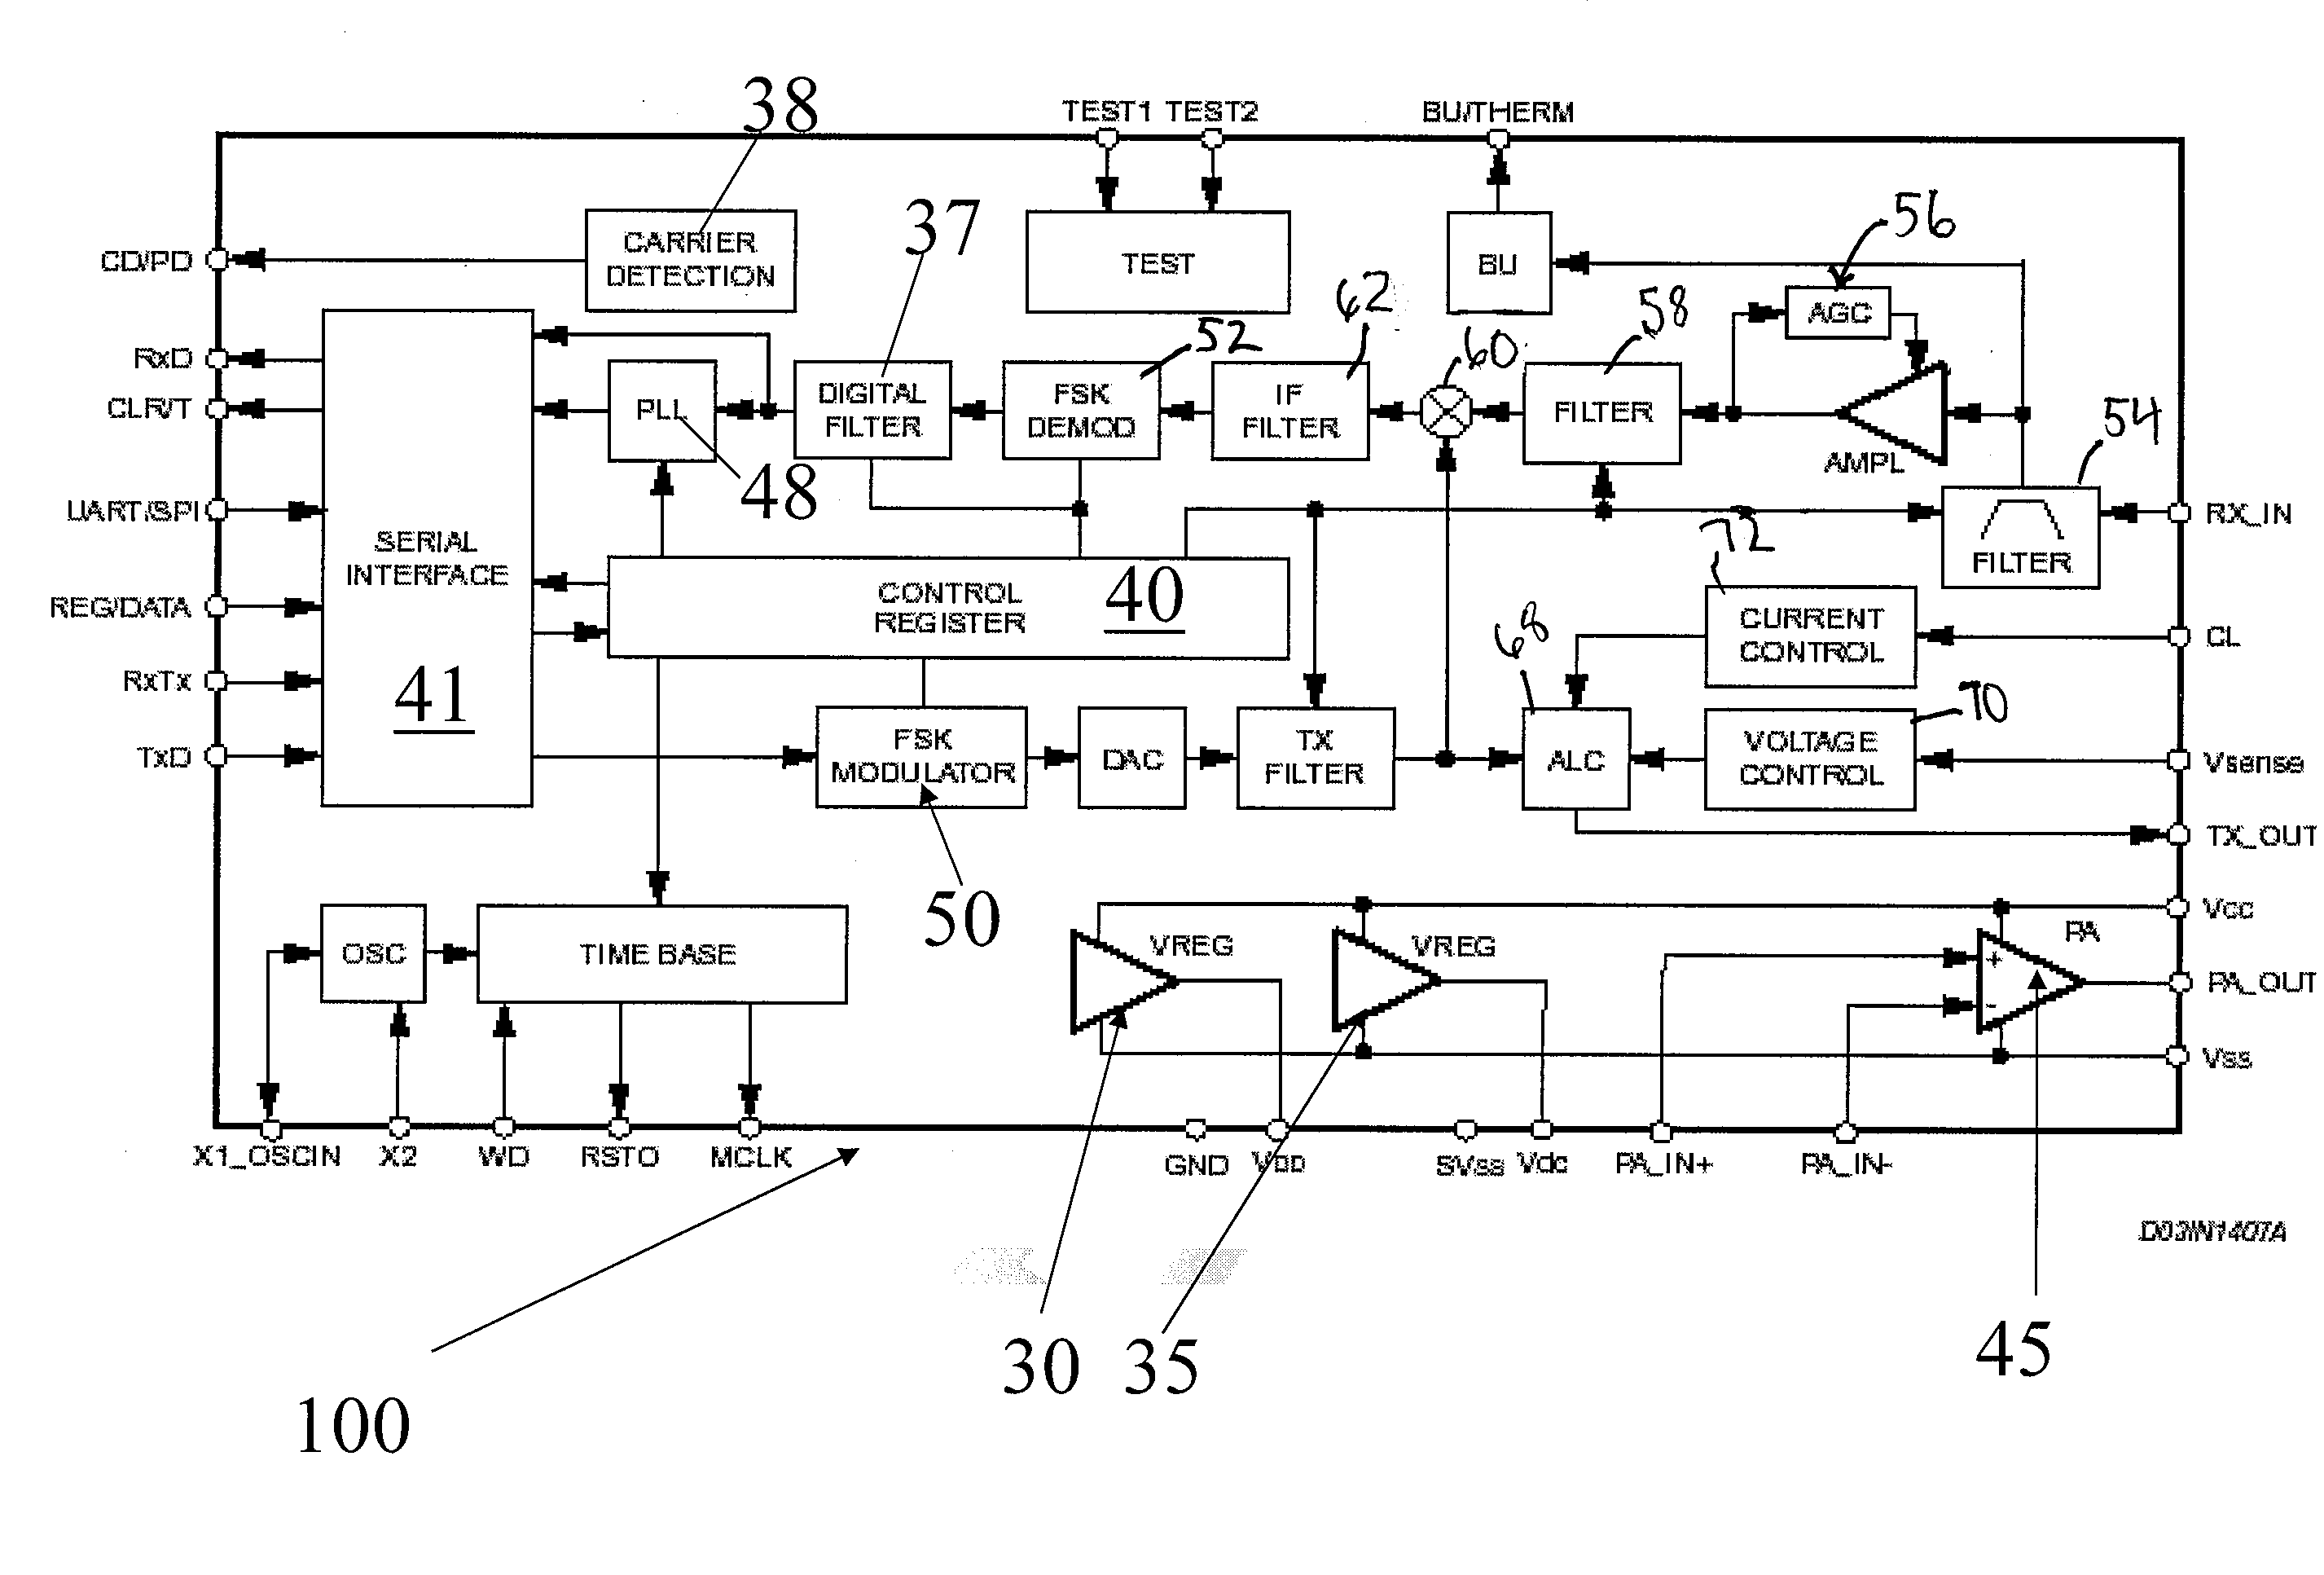 Electronic synchronous/asynchronous transceiver device for power line communication networks